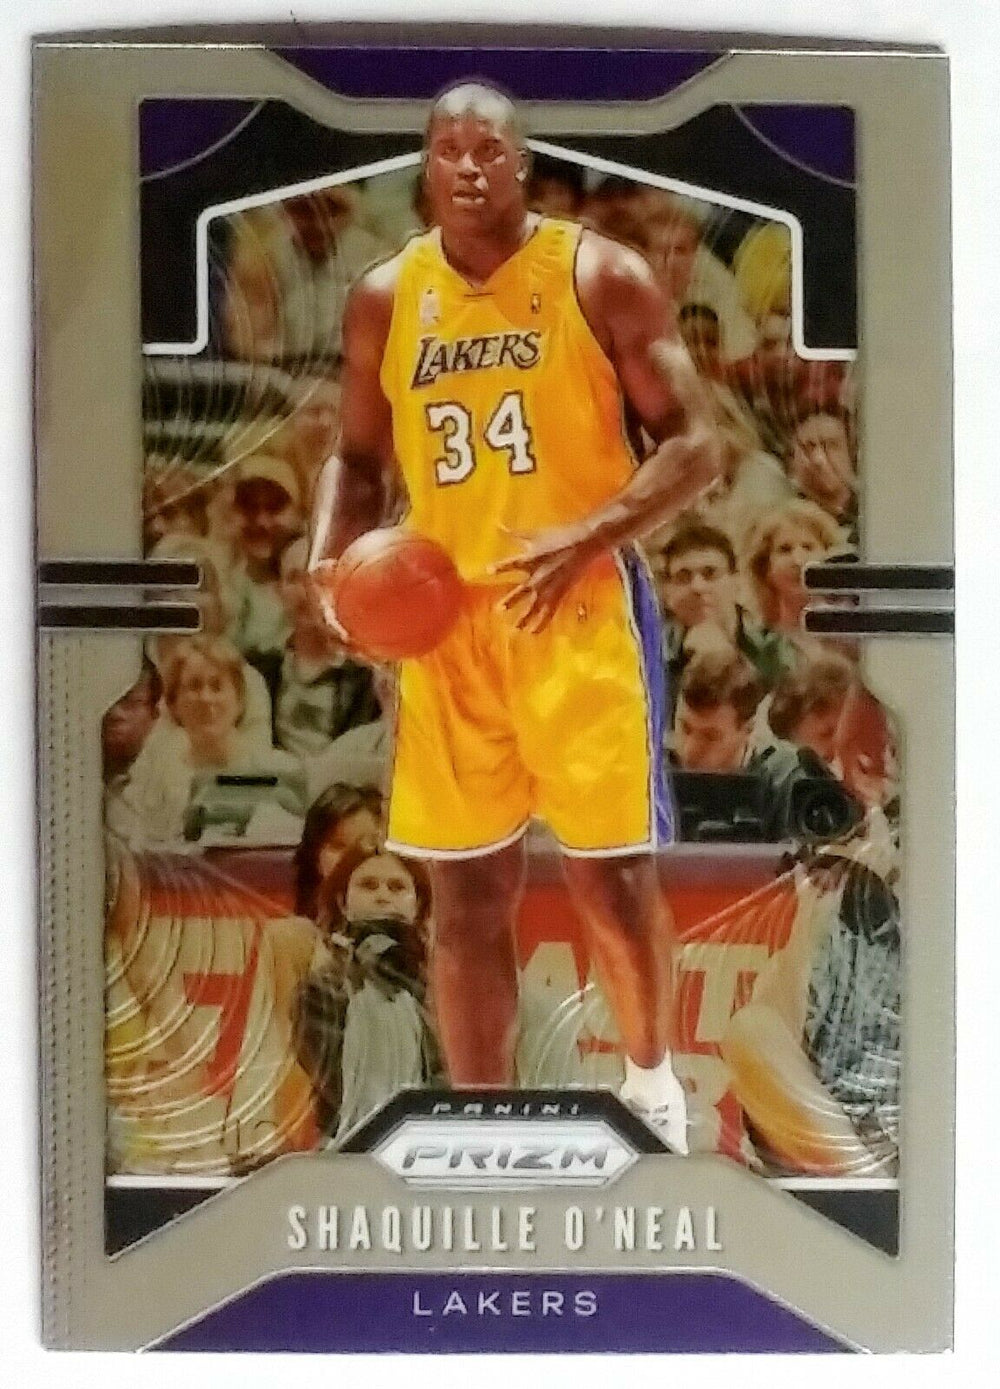 Shaquille O'Neal 2019 2020 Panini Prizm Series Mint Card #11